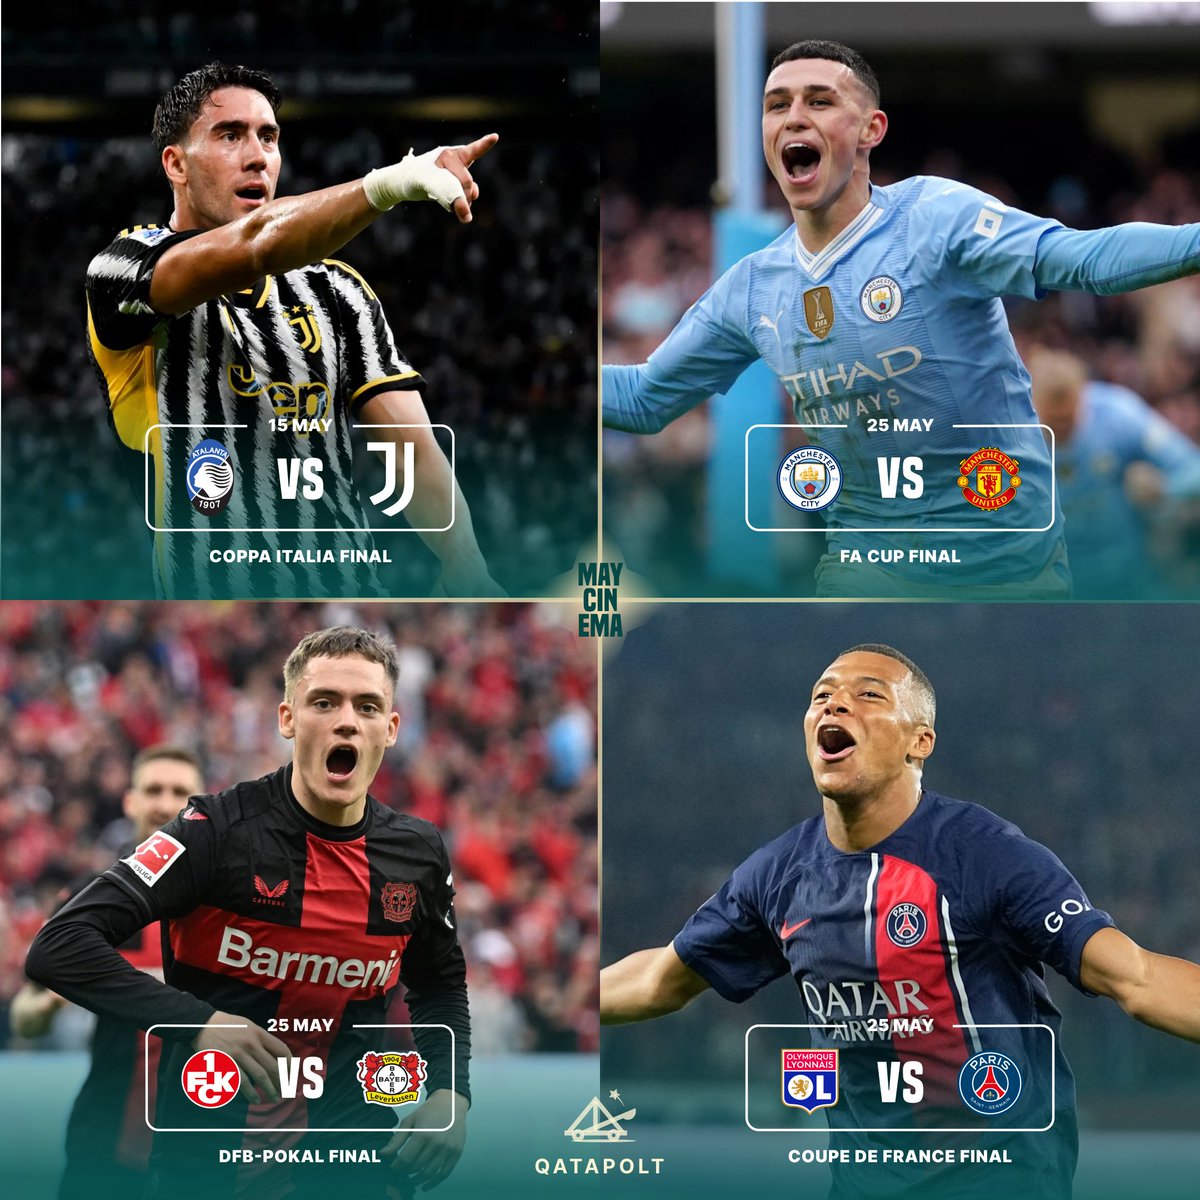 𝗠𝗮𝗿𝗸 𝘆𝗼𝘂𝗿 𝗰𝗮𝗹𝗲𝗻𝗱𝗮𝗿 🗓️ Exciting cup finals await us this May 😍
_
_
_
_
#foryoupage #viral #trending #football #facup #dfbpokal #coppaitalia #coupedefrance 

$GENAI | Drake | #BBLDRIZZY #MiamiGP